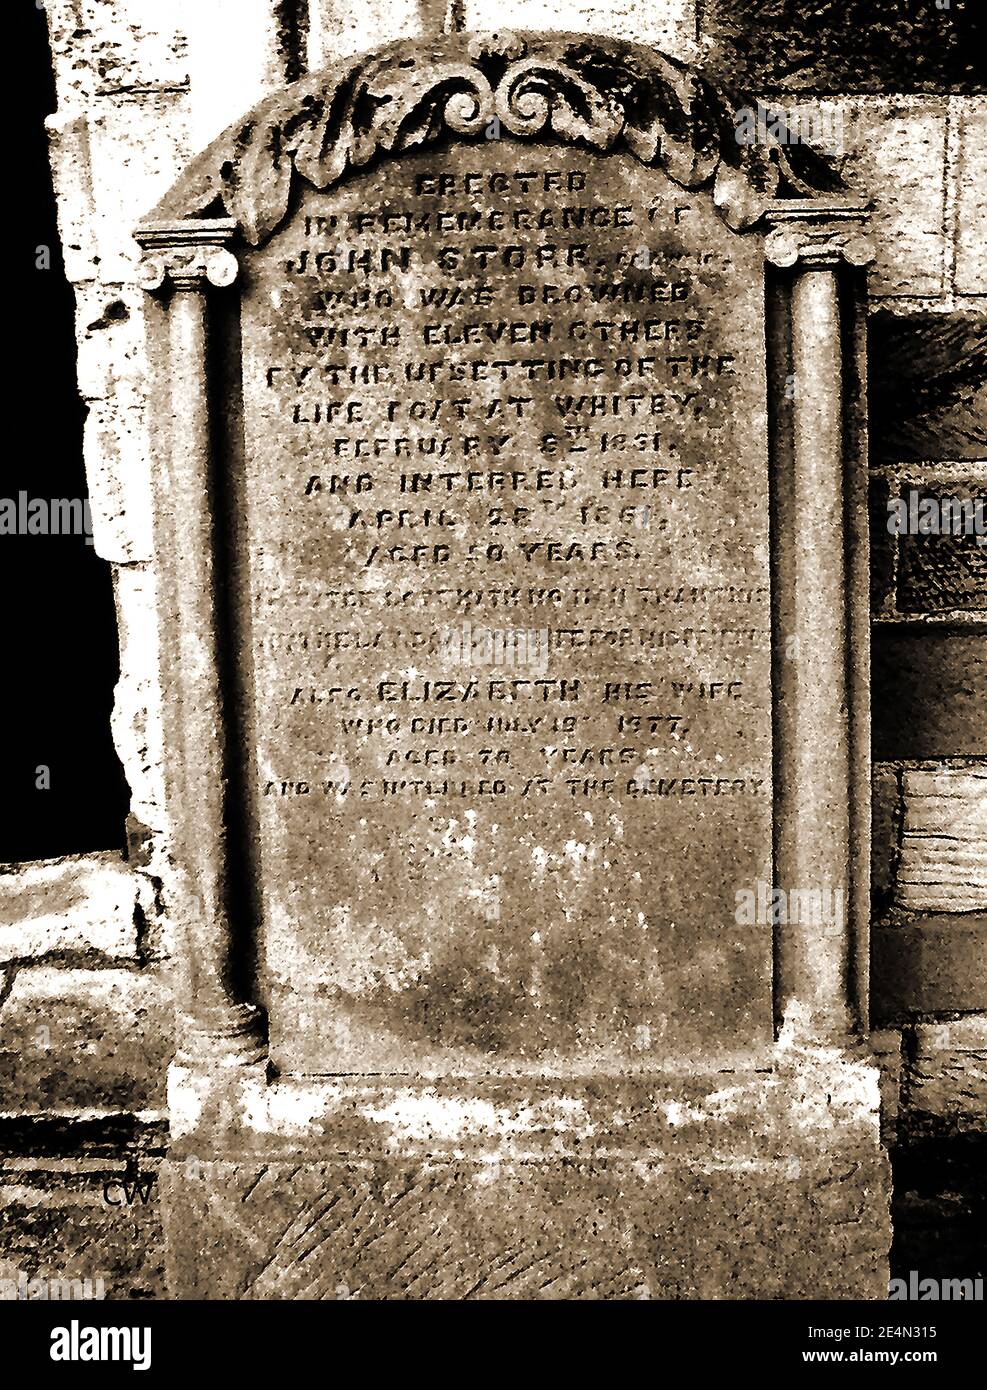 1861 WHITBY LIFEBOAT DISASTER - The gravestone of  John Storr (coxwain) one of the 11 crew who drowned  - During a severe storm on 9 February 1861, a Whitby lifeboat capsized, throwing the crew overboard. All except one had wife / children. Only one member of the crew, Henry Freeman, survived because he was wearing a new cork lifejacket. John Storr and the rest of his crewmen drowned. 200 ships were lost on the east coast Stock Photo